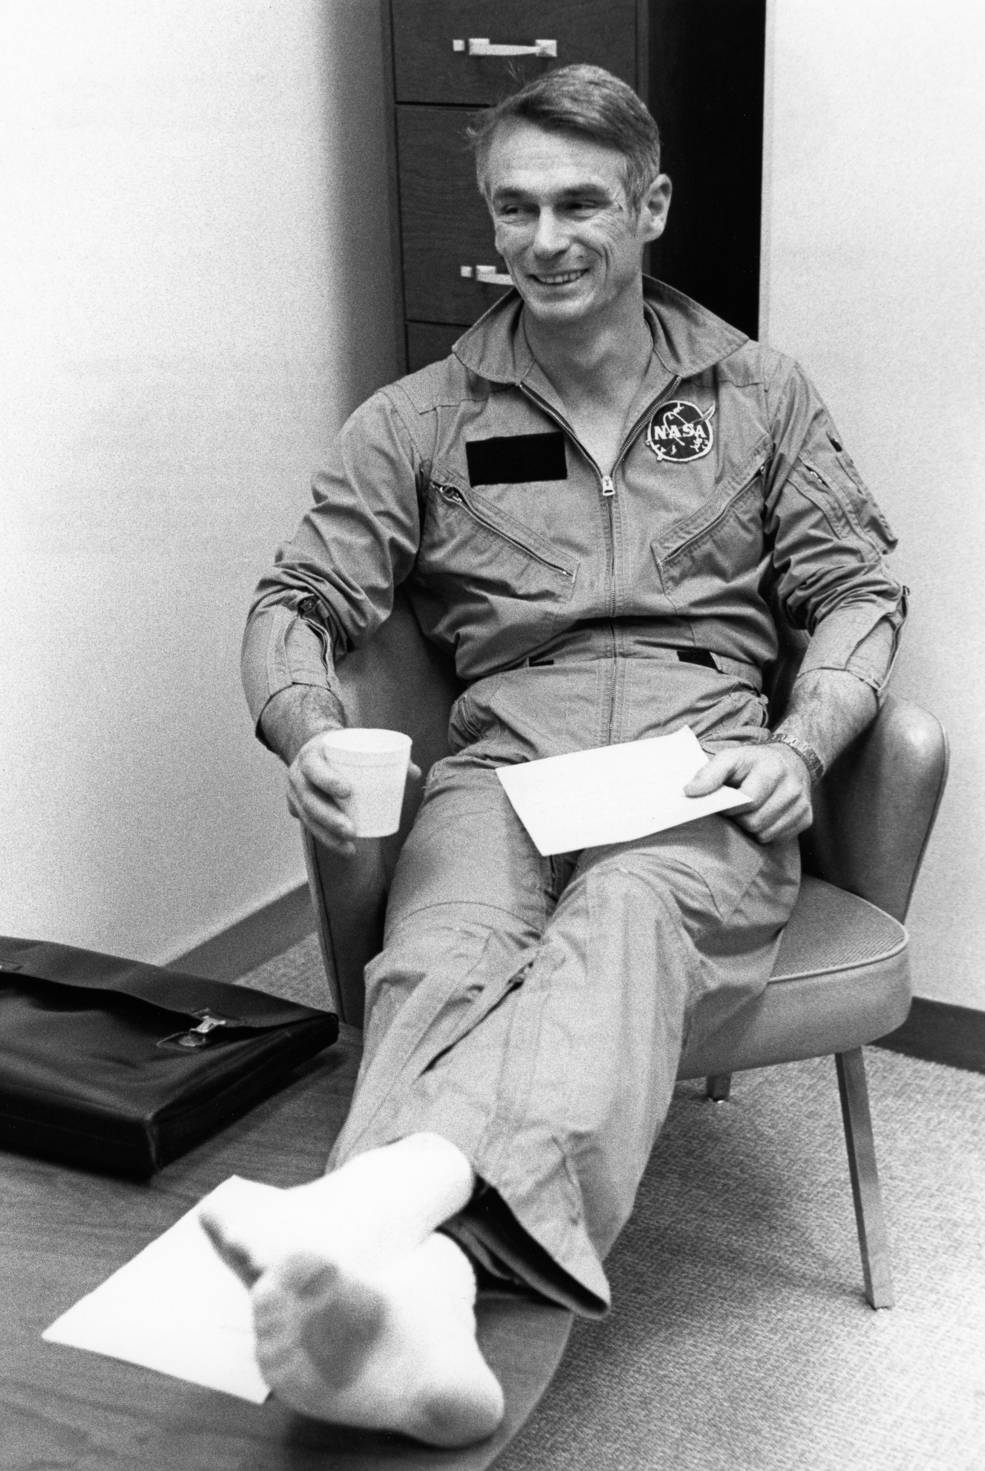 cernan_at_crew_qrts_after_helo_crash_earlier_that_day-1.23.71